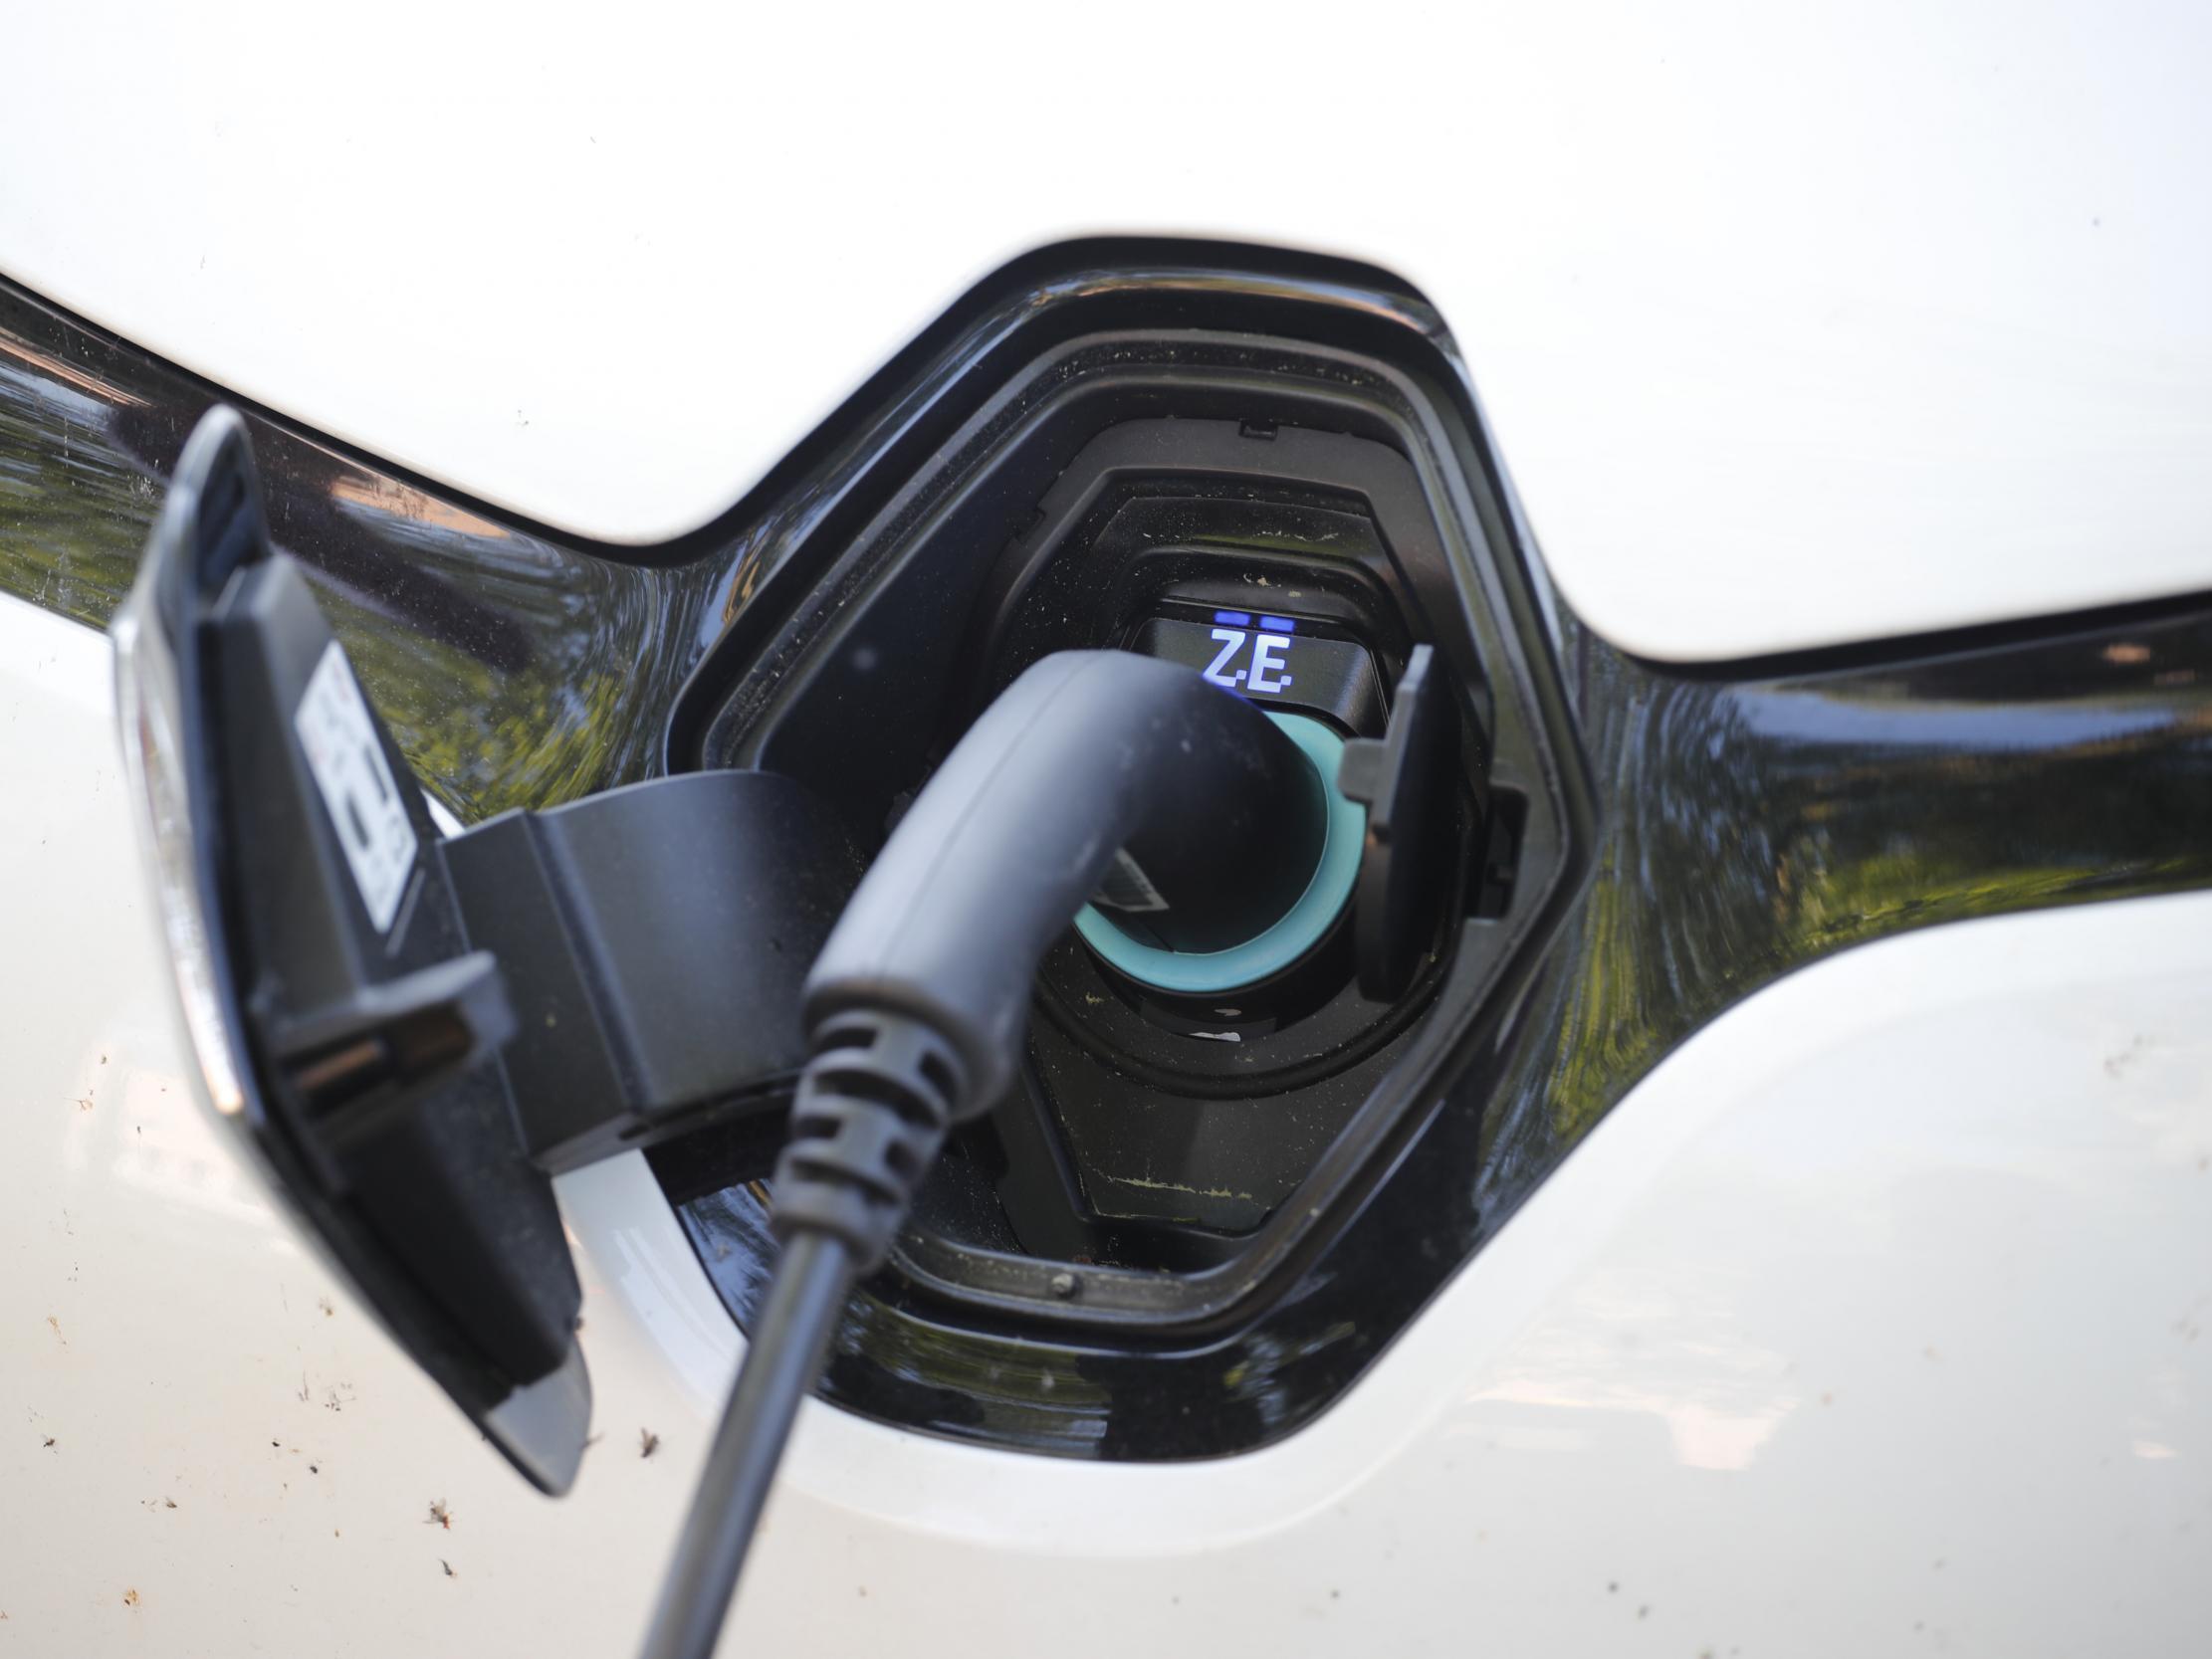 A service station in Maryland dropped petrol for electric charging stations, which can power up to four vehicles at once.